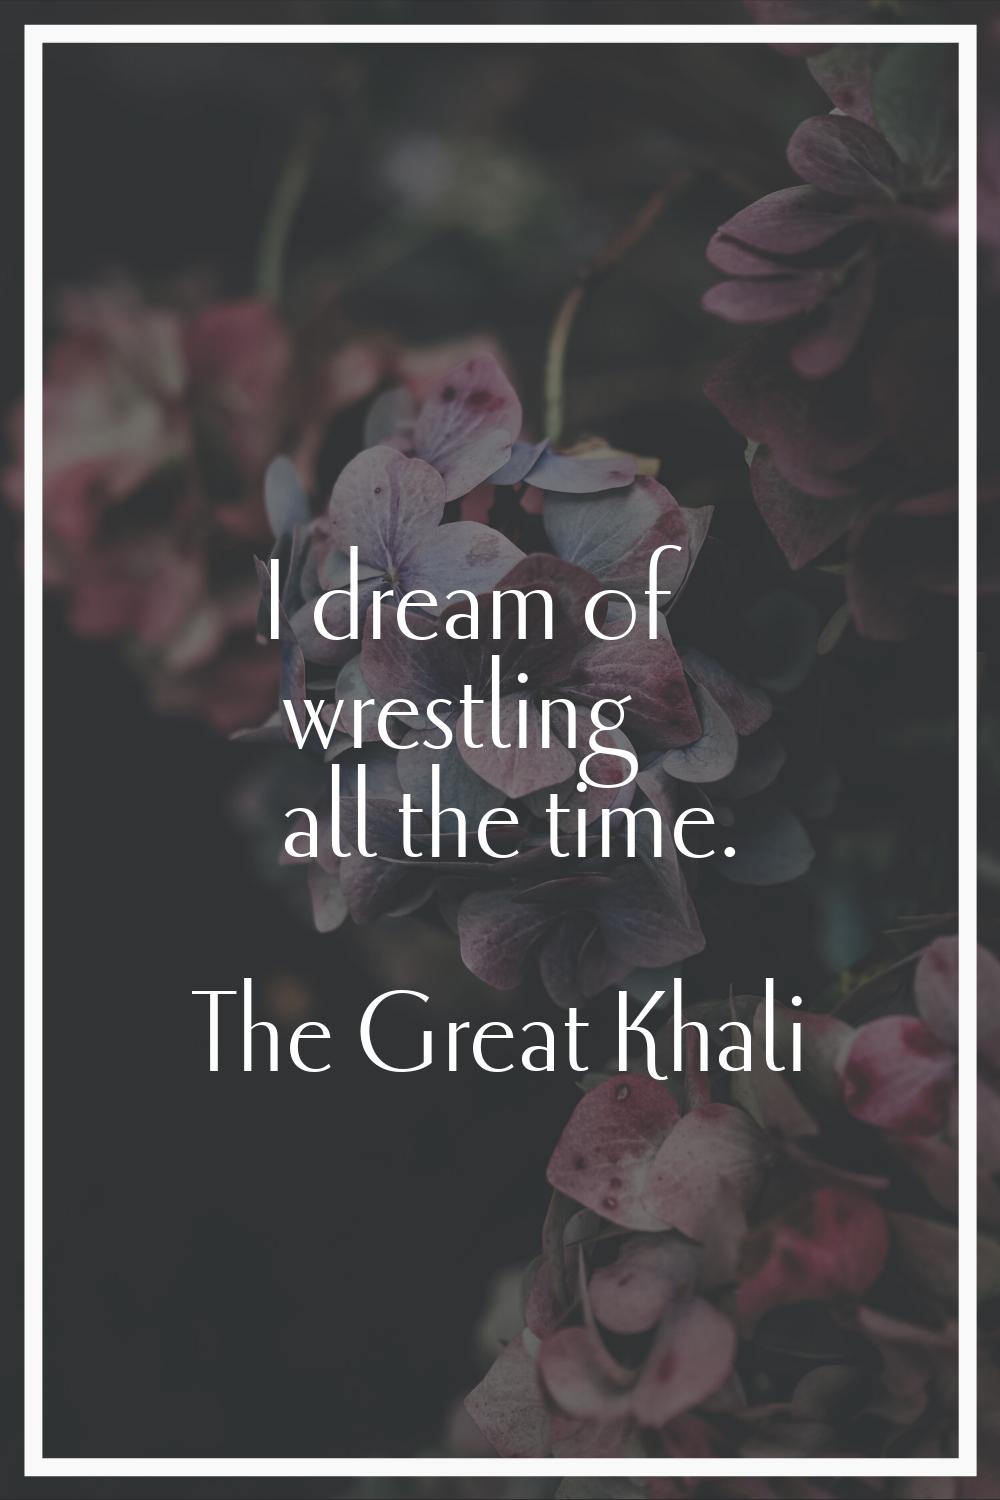 I dream of wrestling all the time.